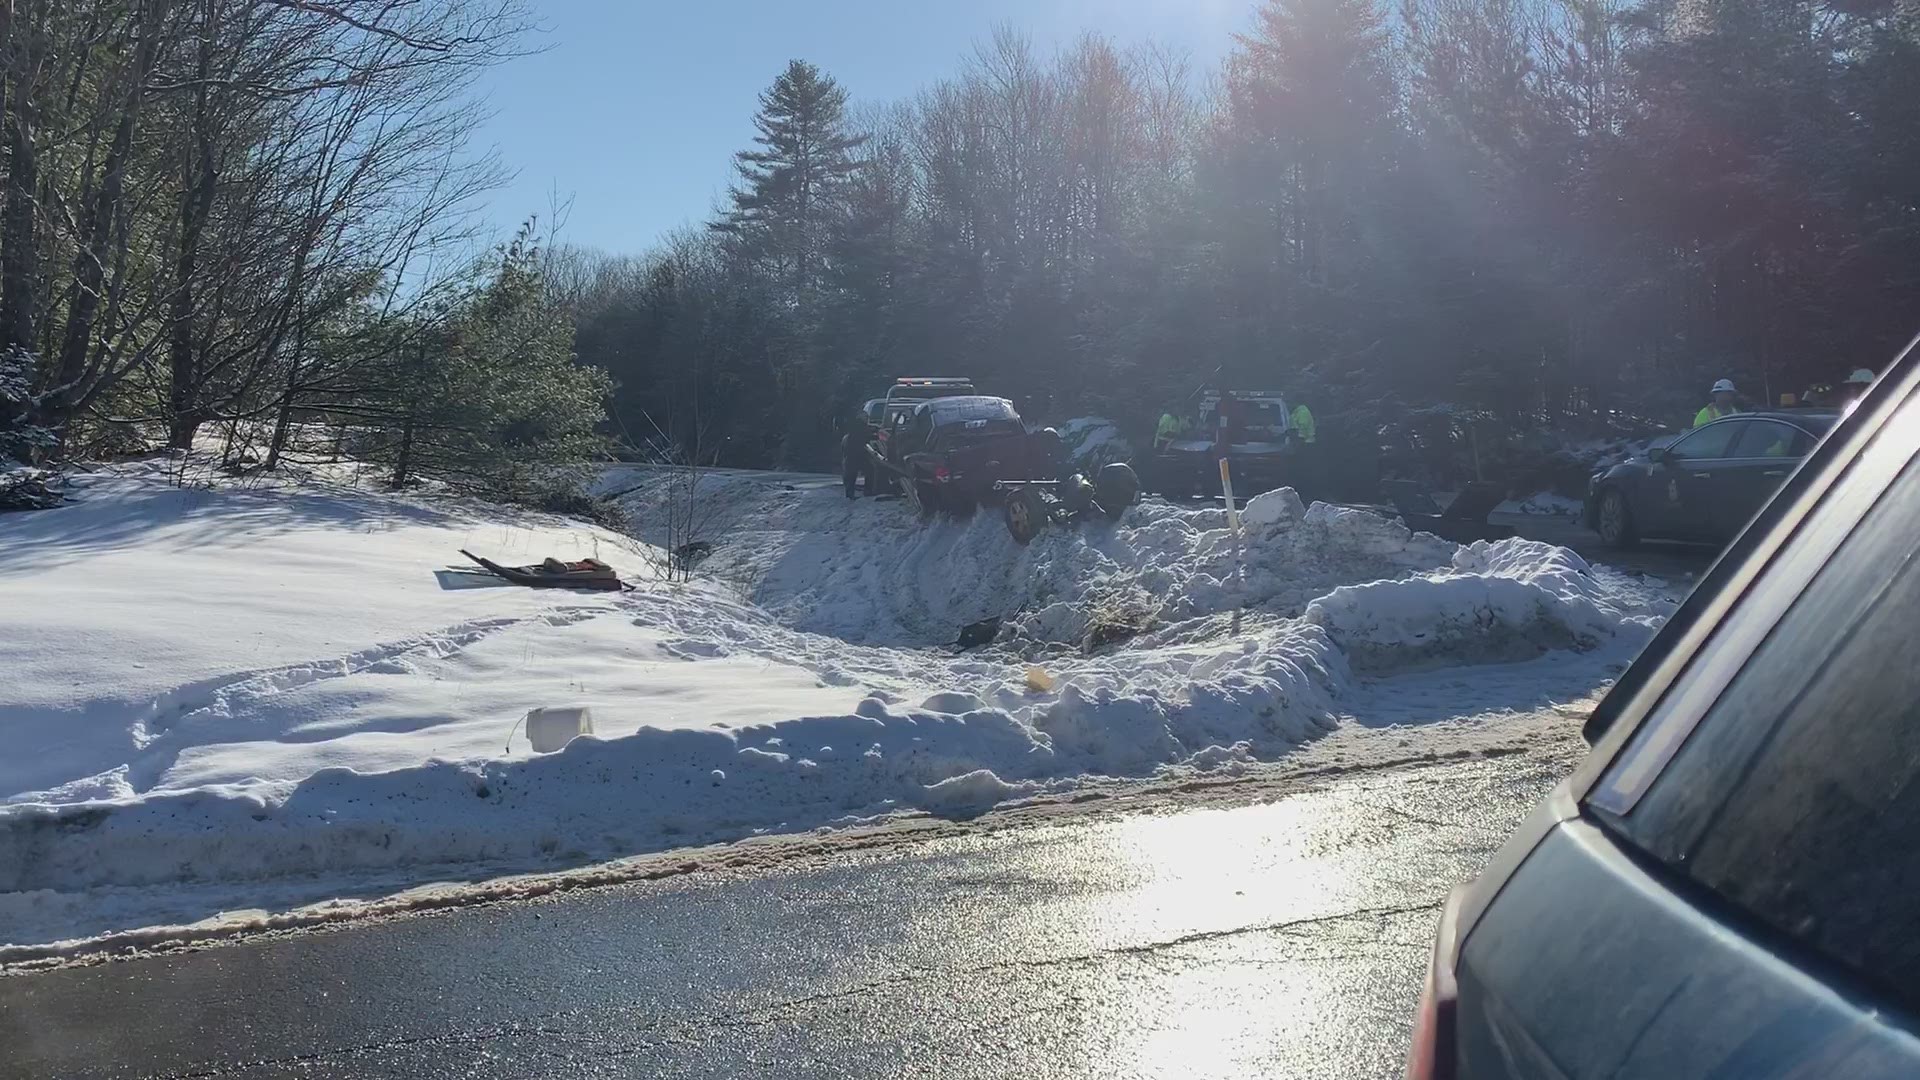 A car crash pileup involving about 30 cars, left many injured, according to Maine State Police.